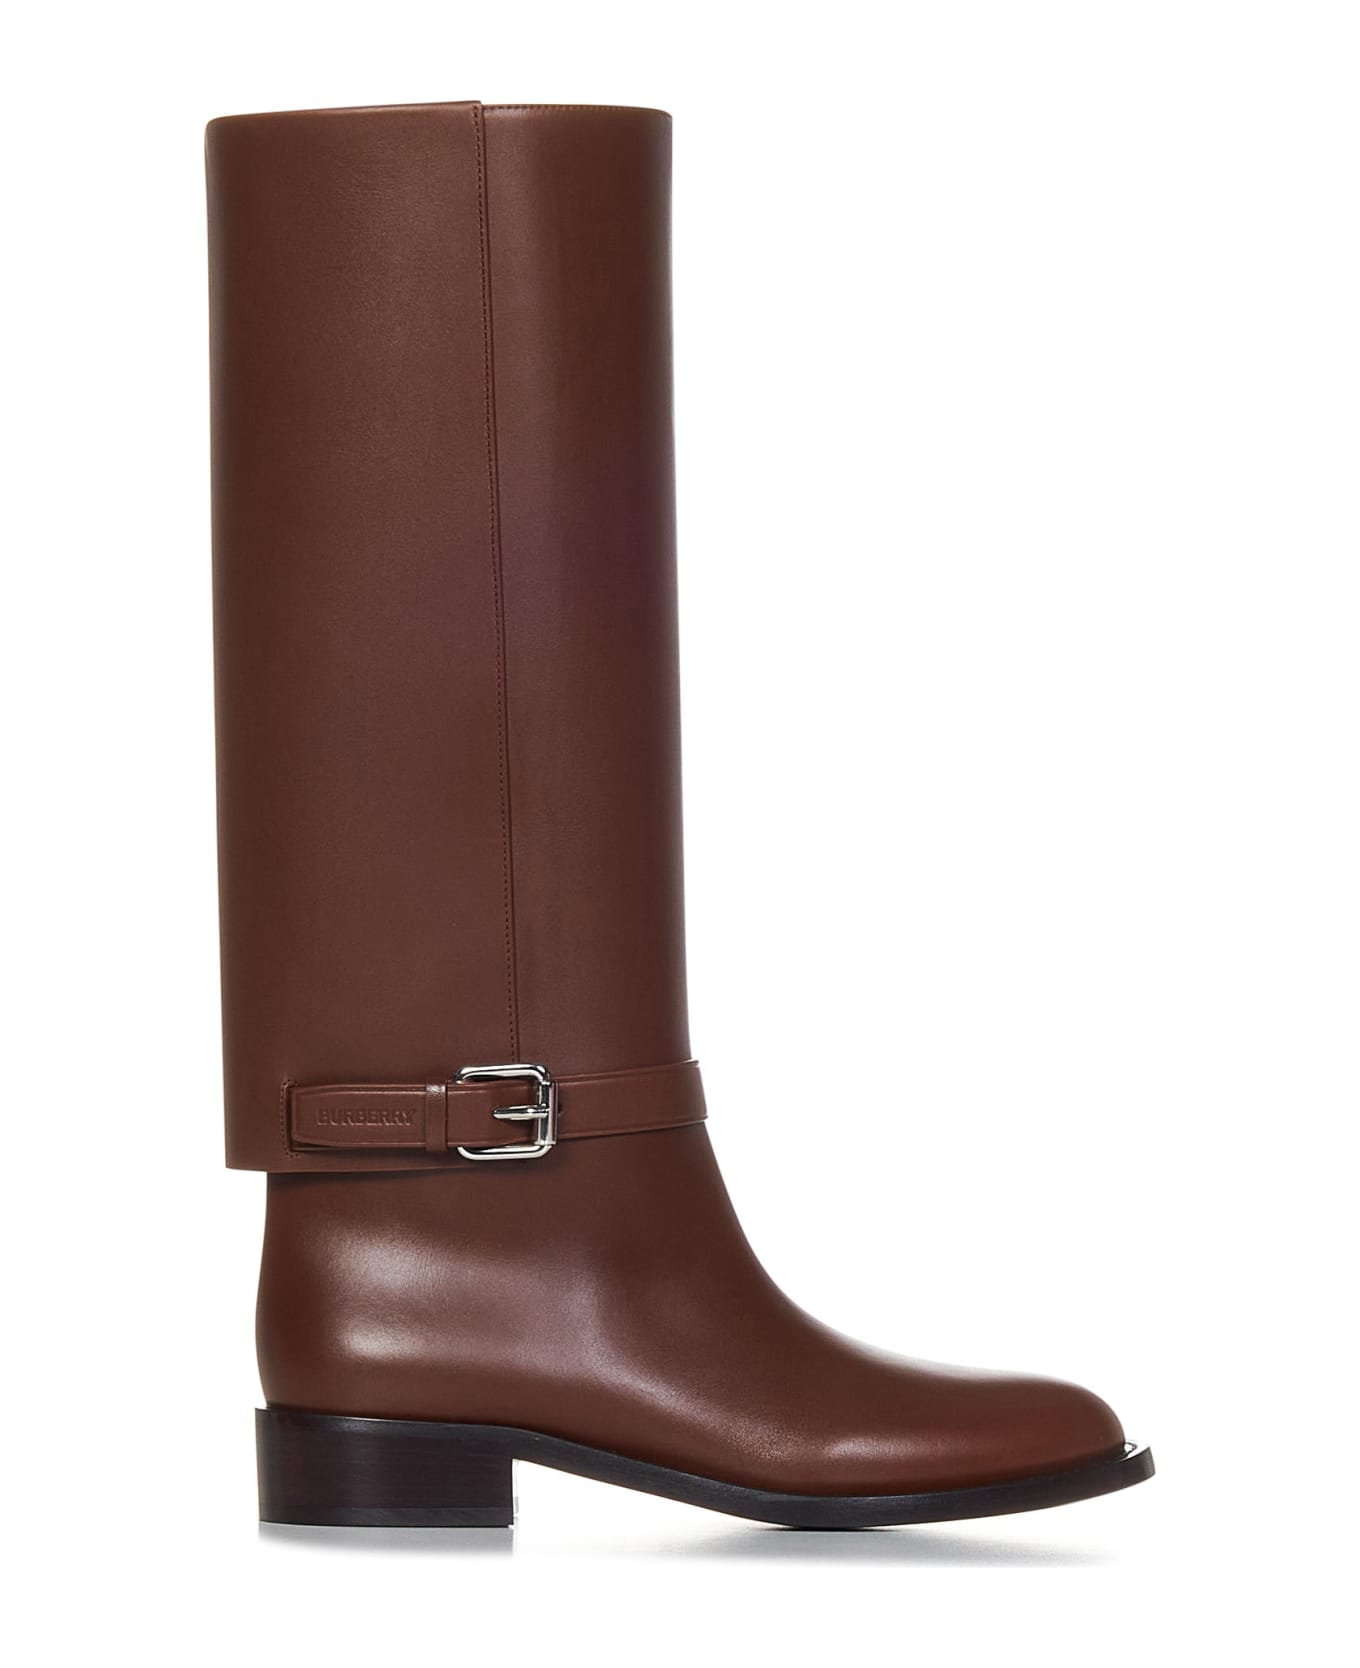 Burberry Boots - Brown ブーツ